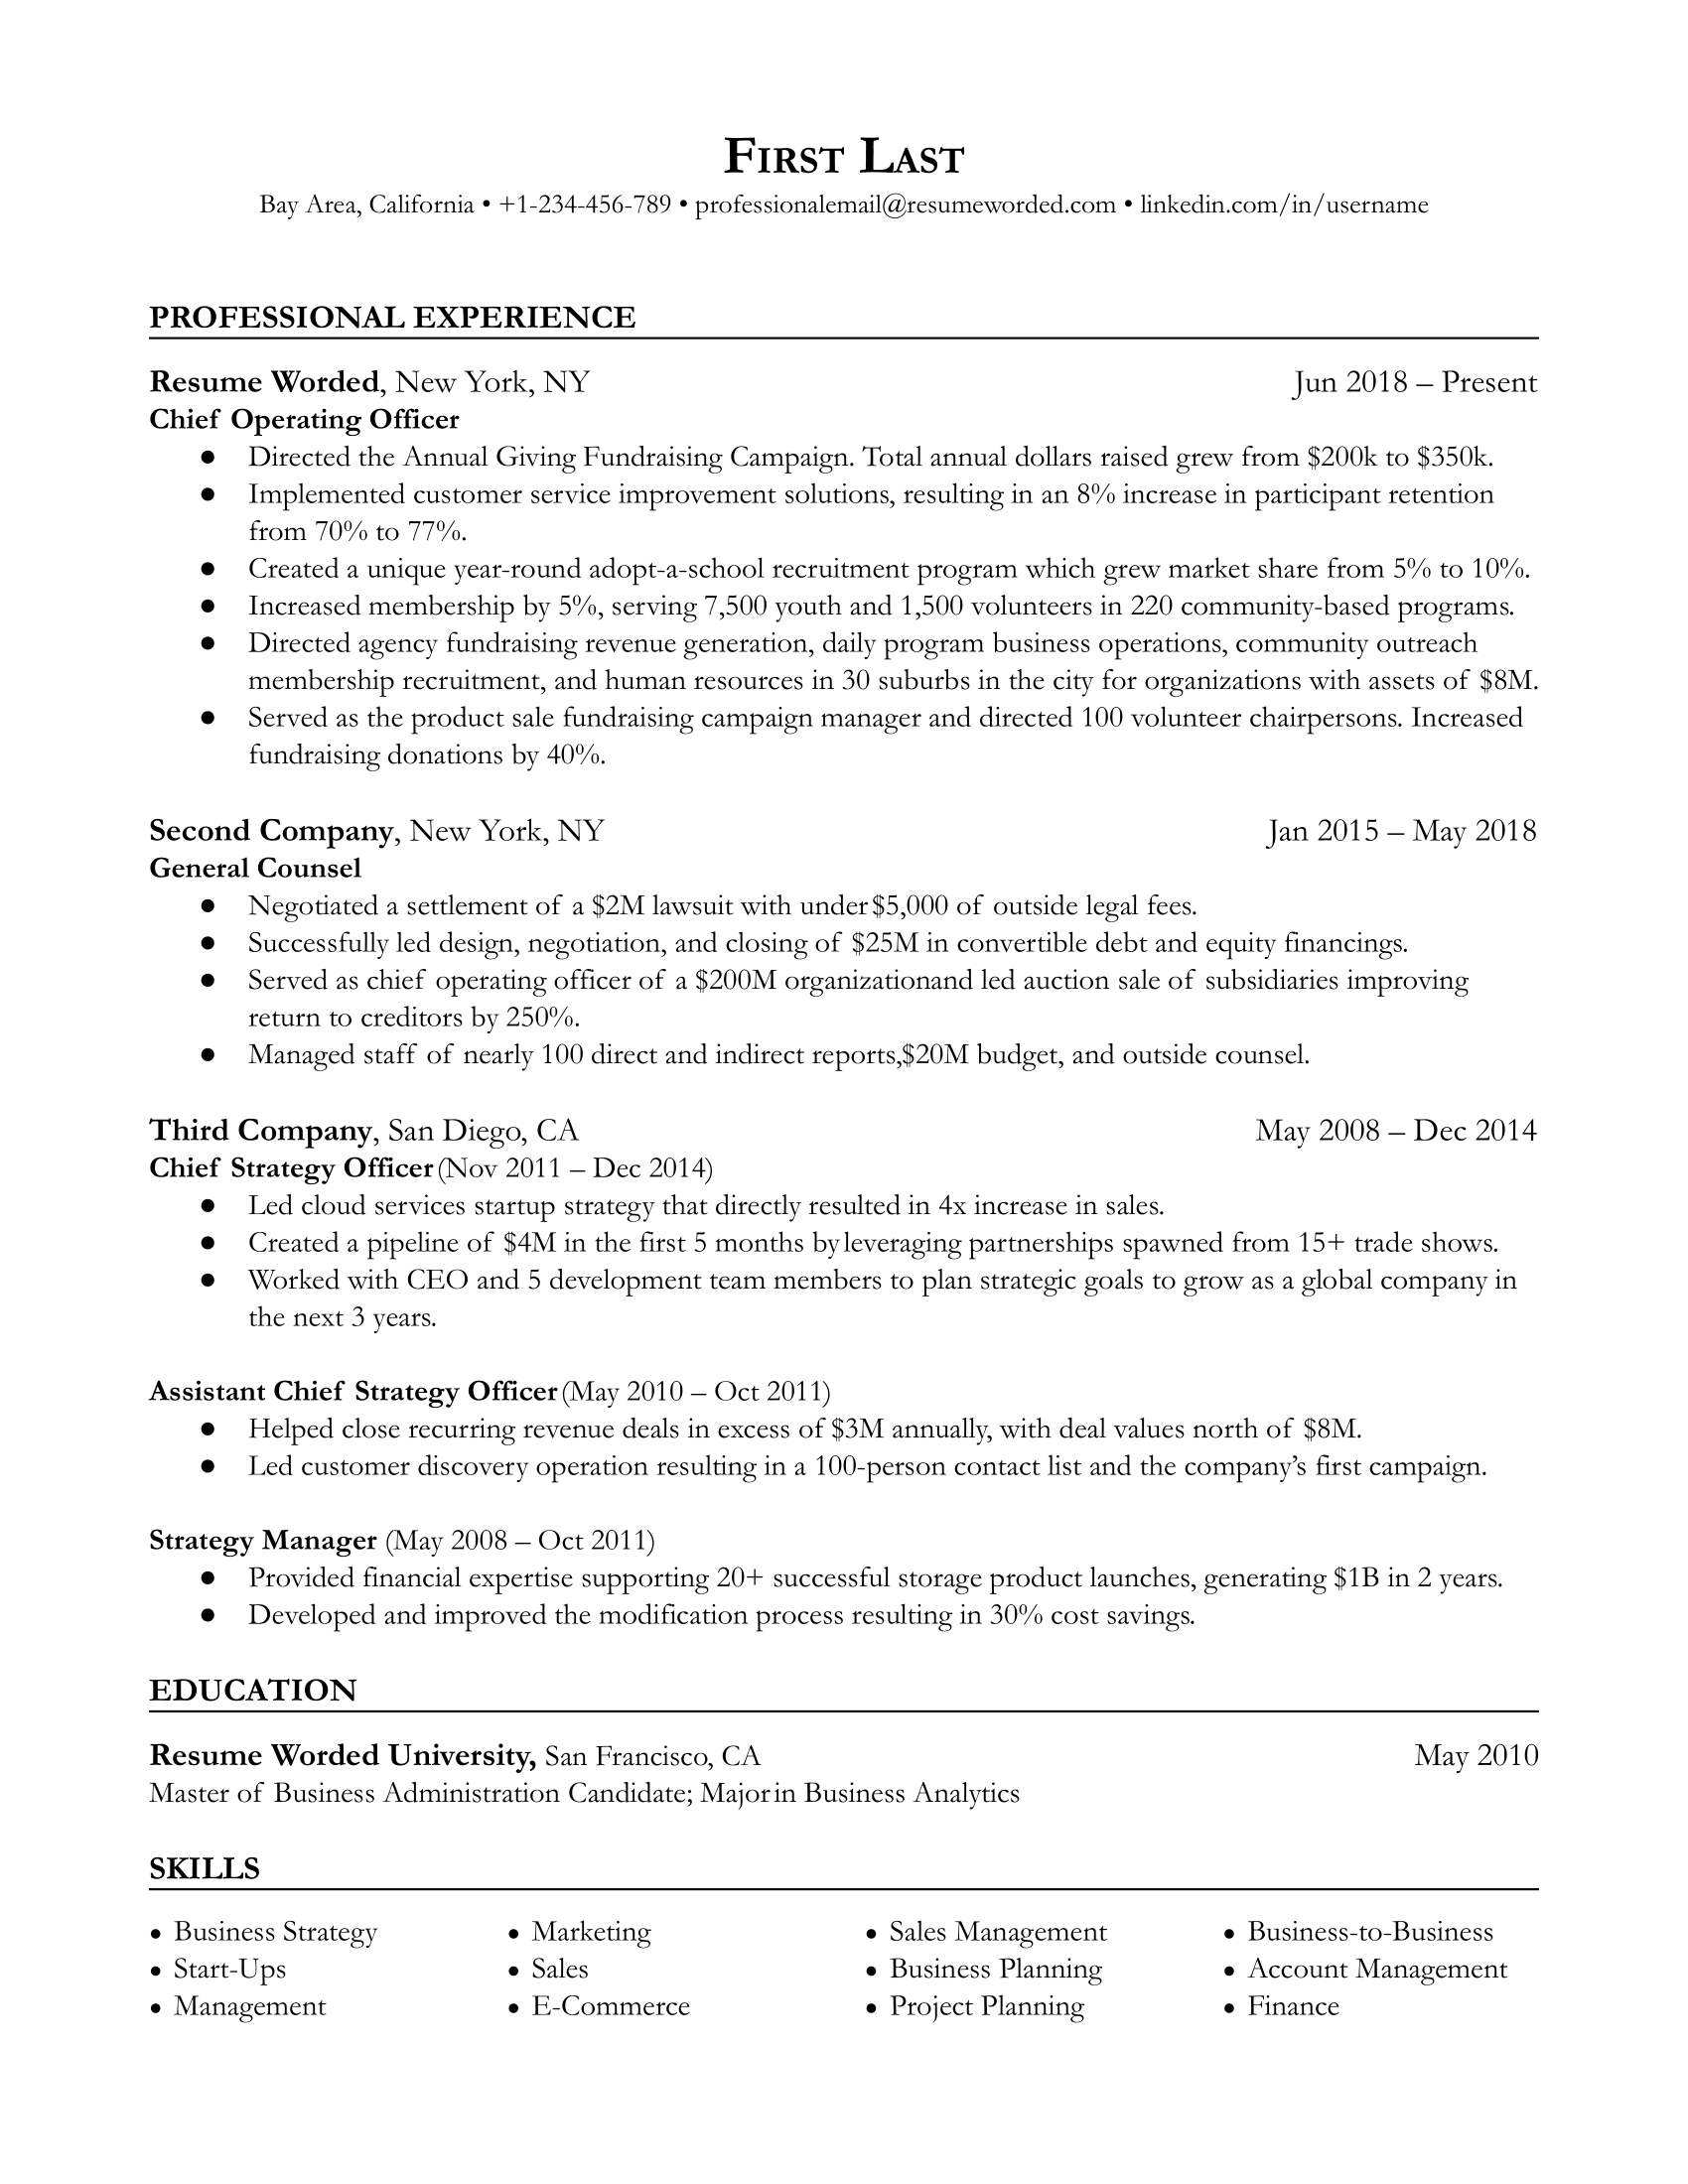 Chief Operating Officer resume template example with clear metrics that emphasize transferable skills